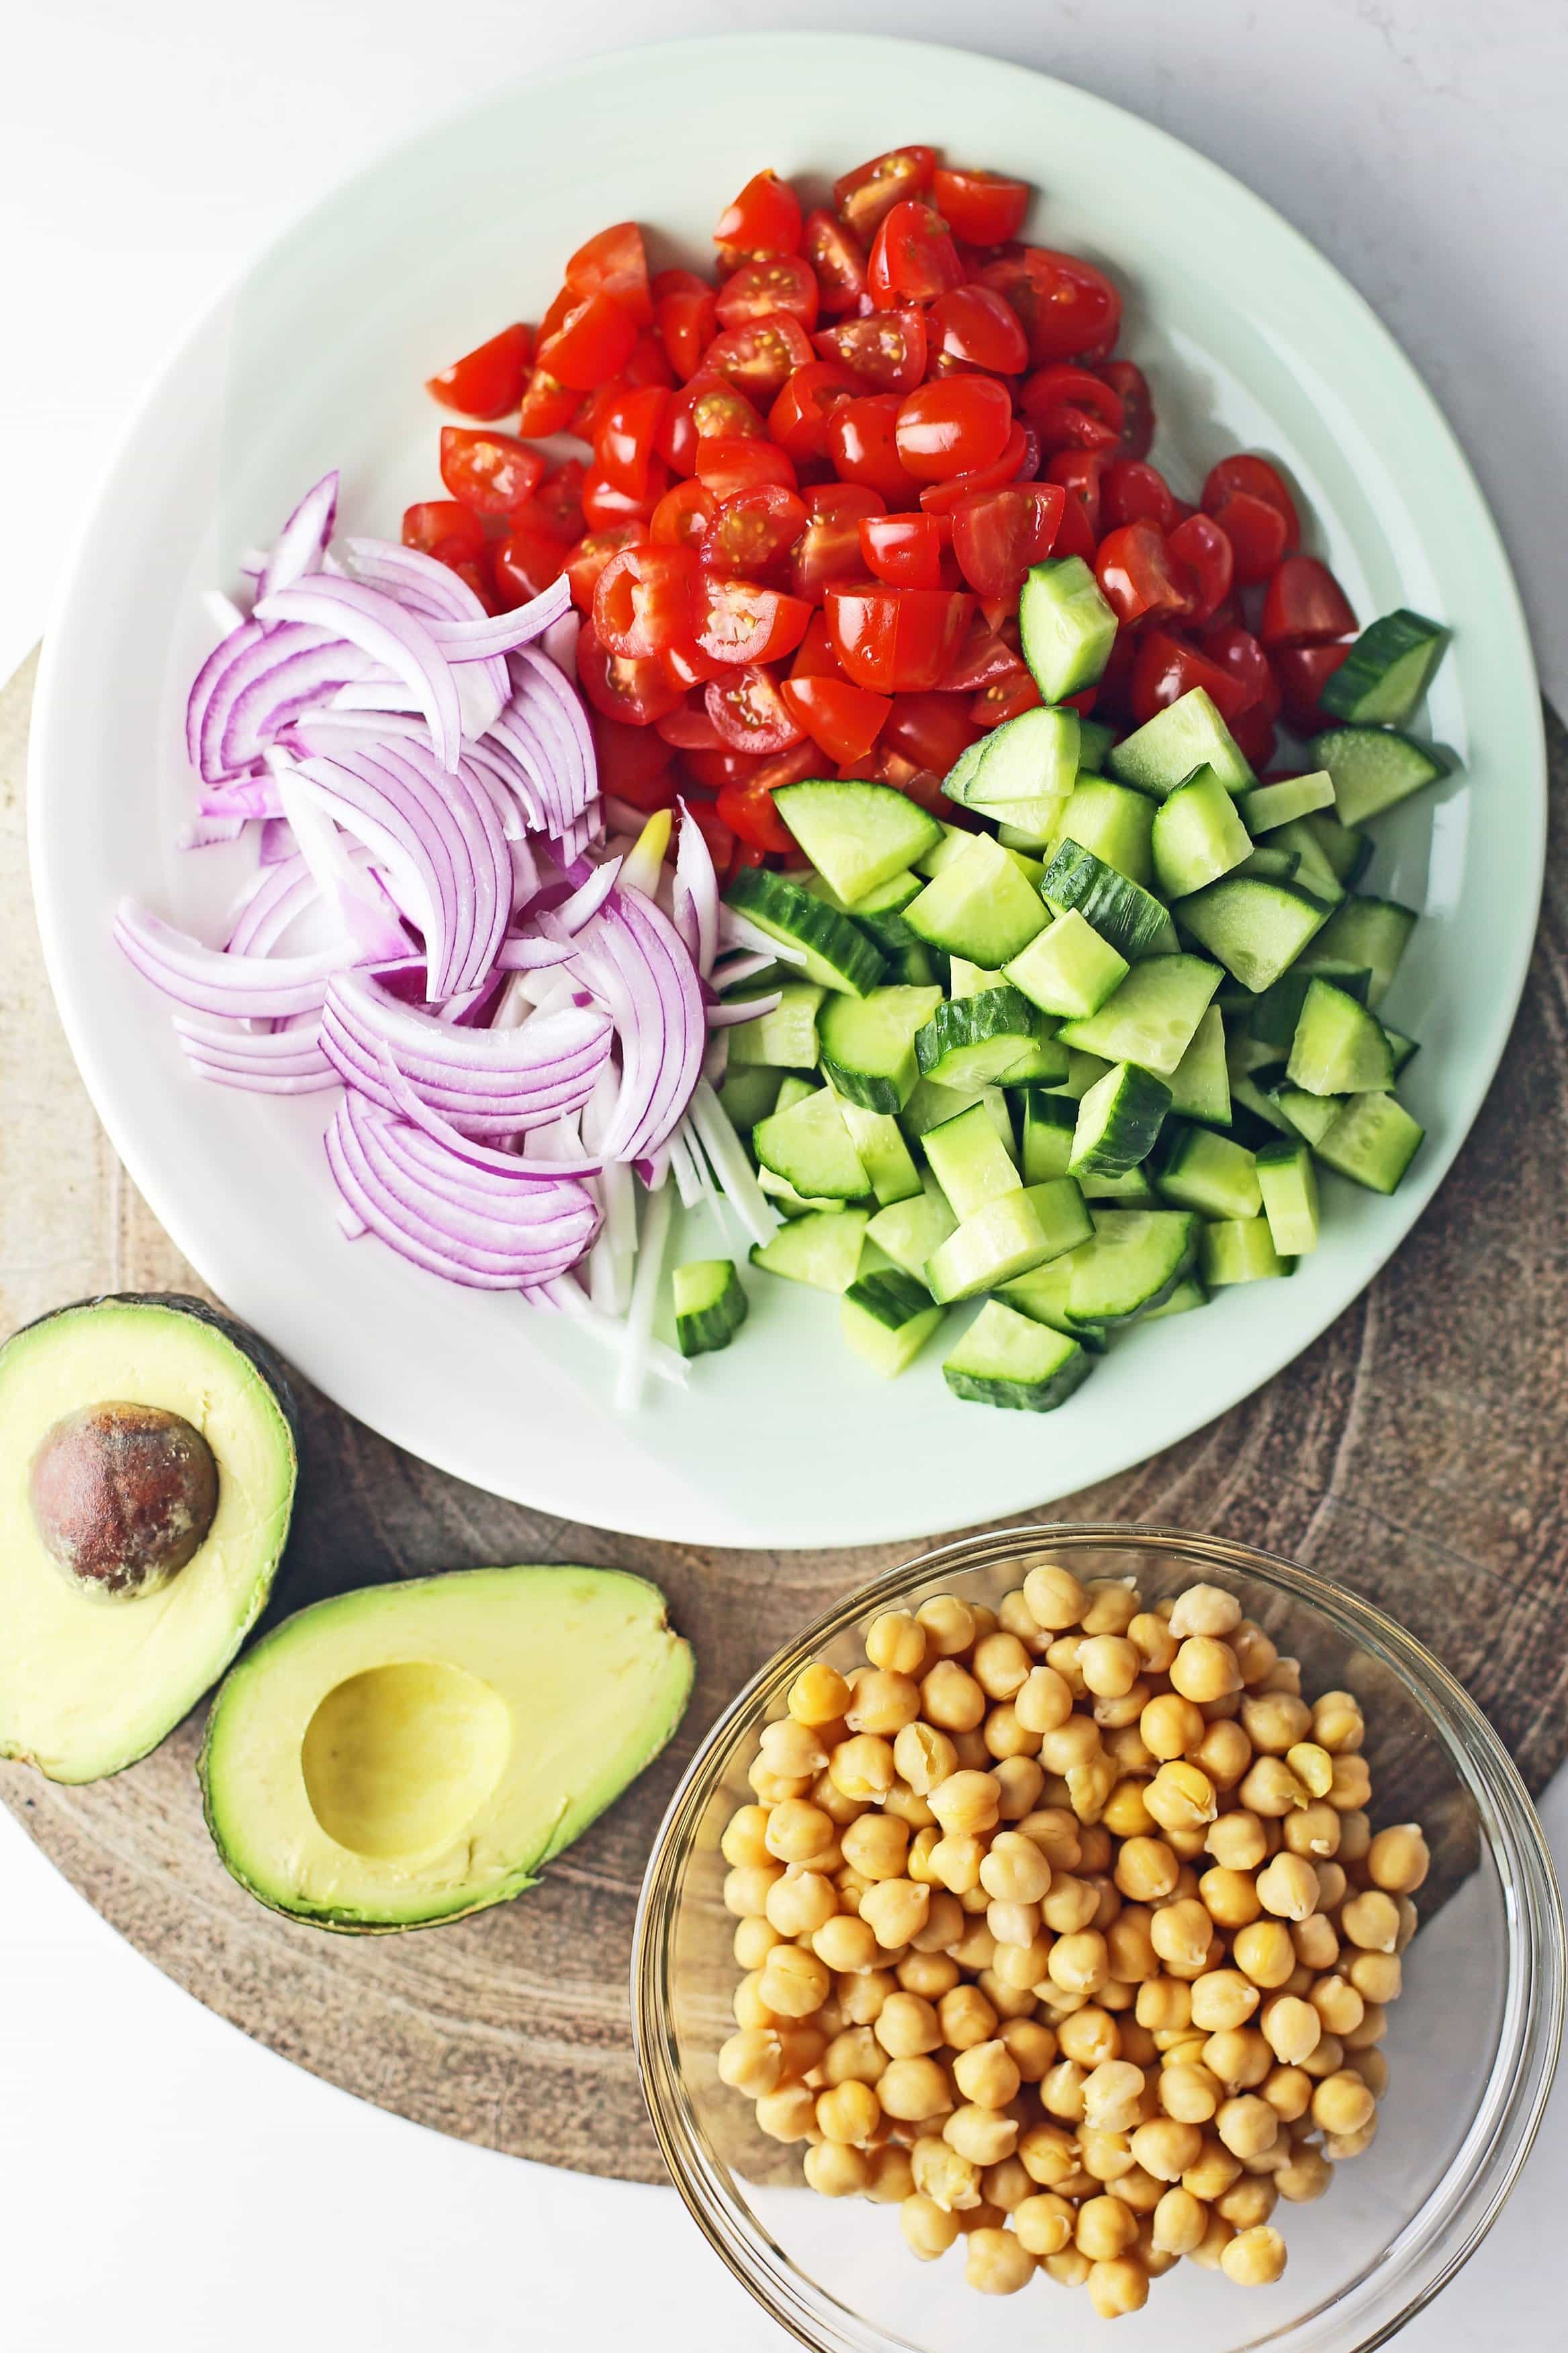 A large plate containing chopped and sliced English cucumber, grape tomatoes, and red onions, a bowl of cooked chickpeas, and an avocado cut in half.